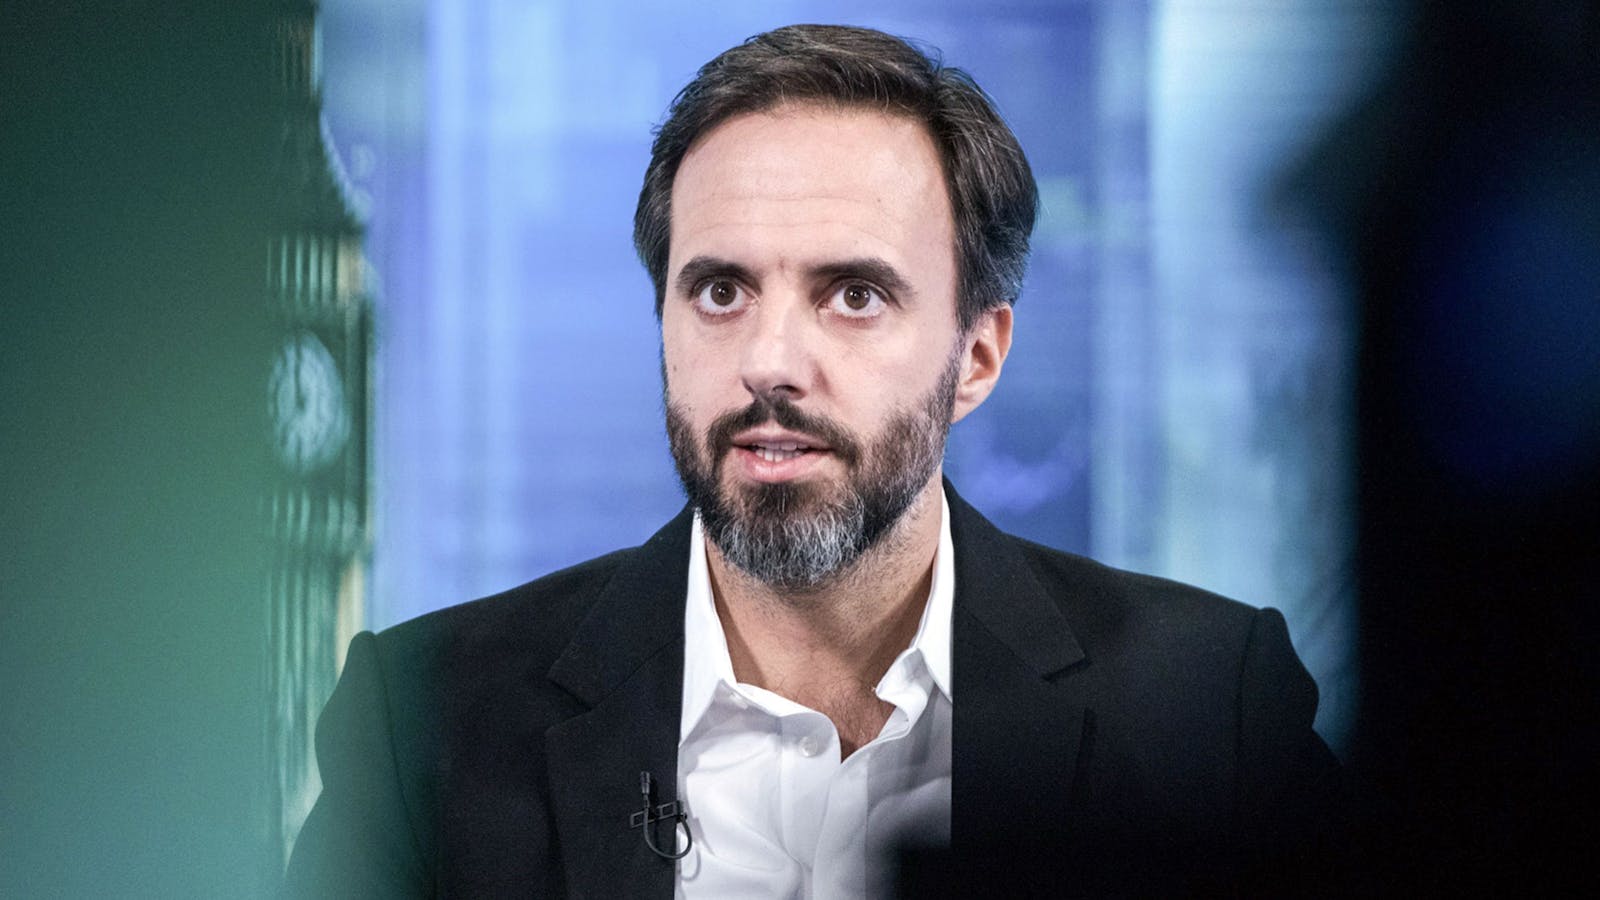 Farfetch CEO Jose Neves. Photo by Bloomberg